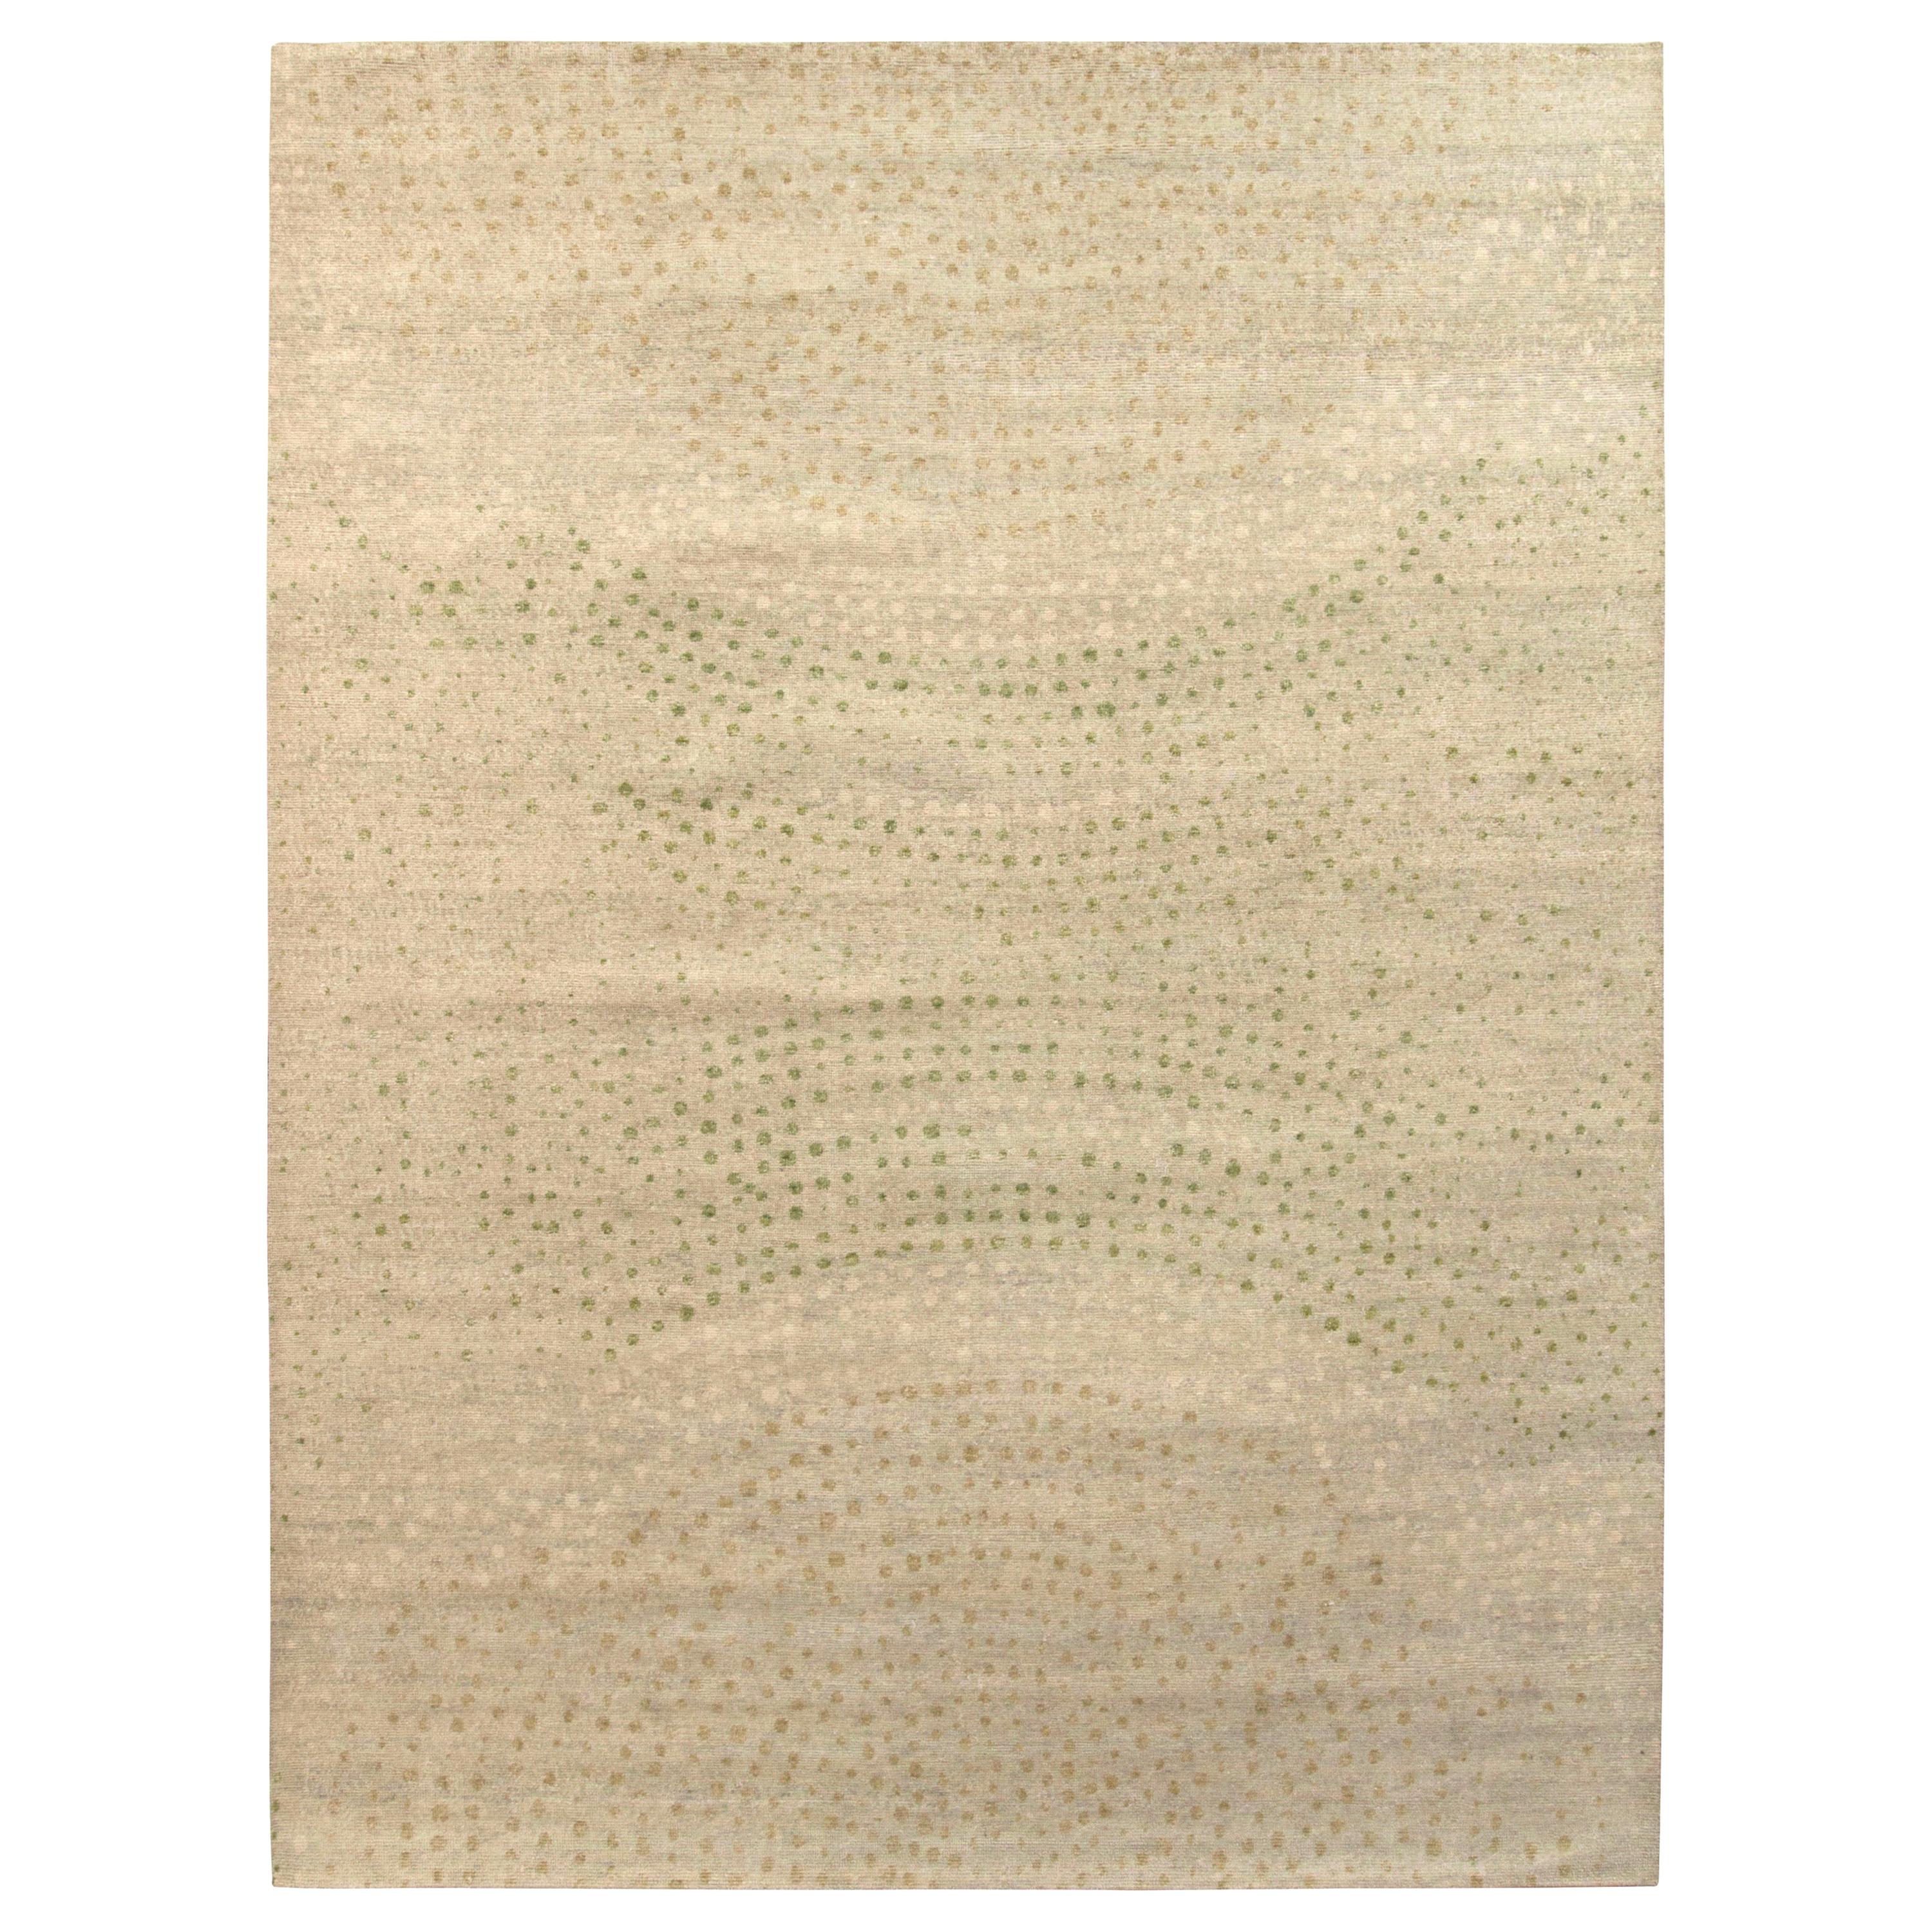 Rug & Kilim’s Distressed Style Modern Rug in Beige, Green Dots Pattern For Sale